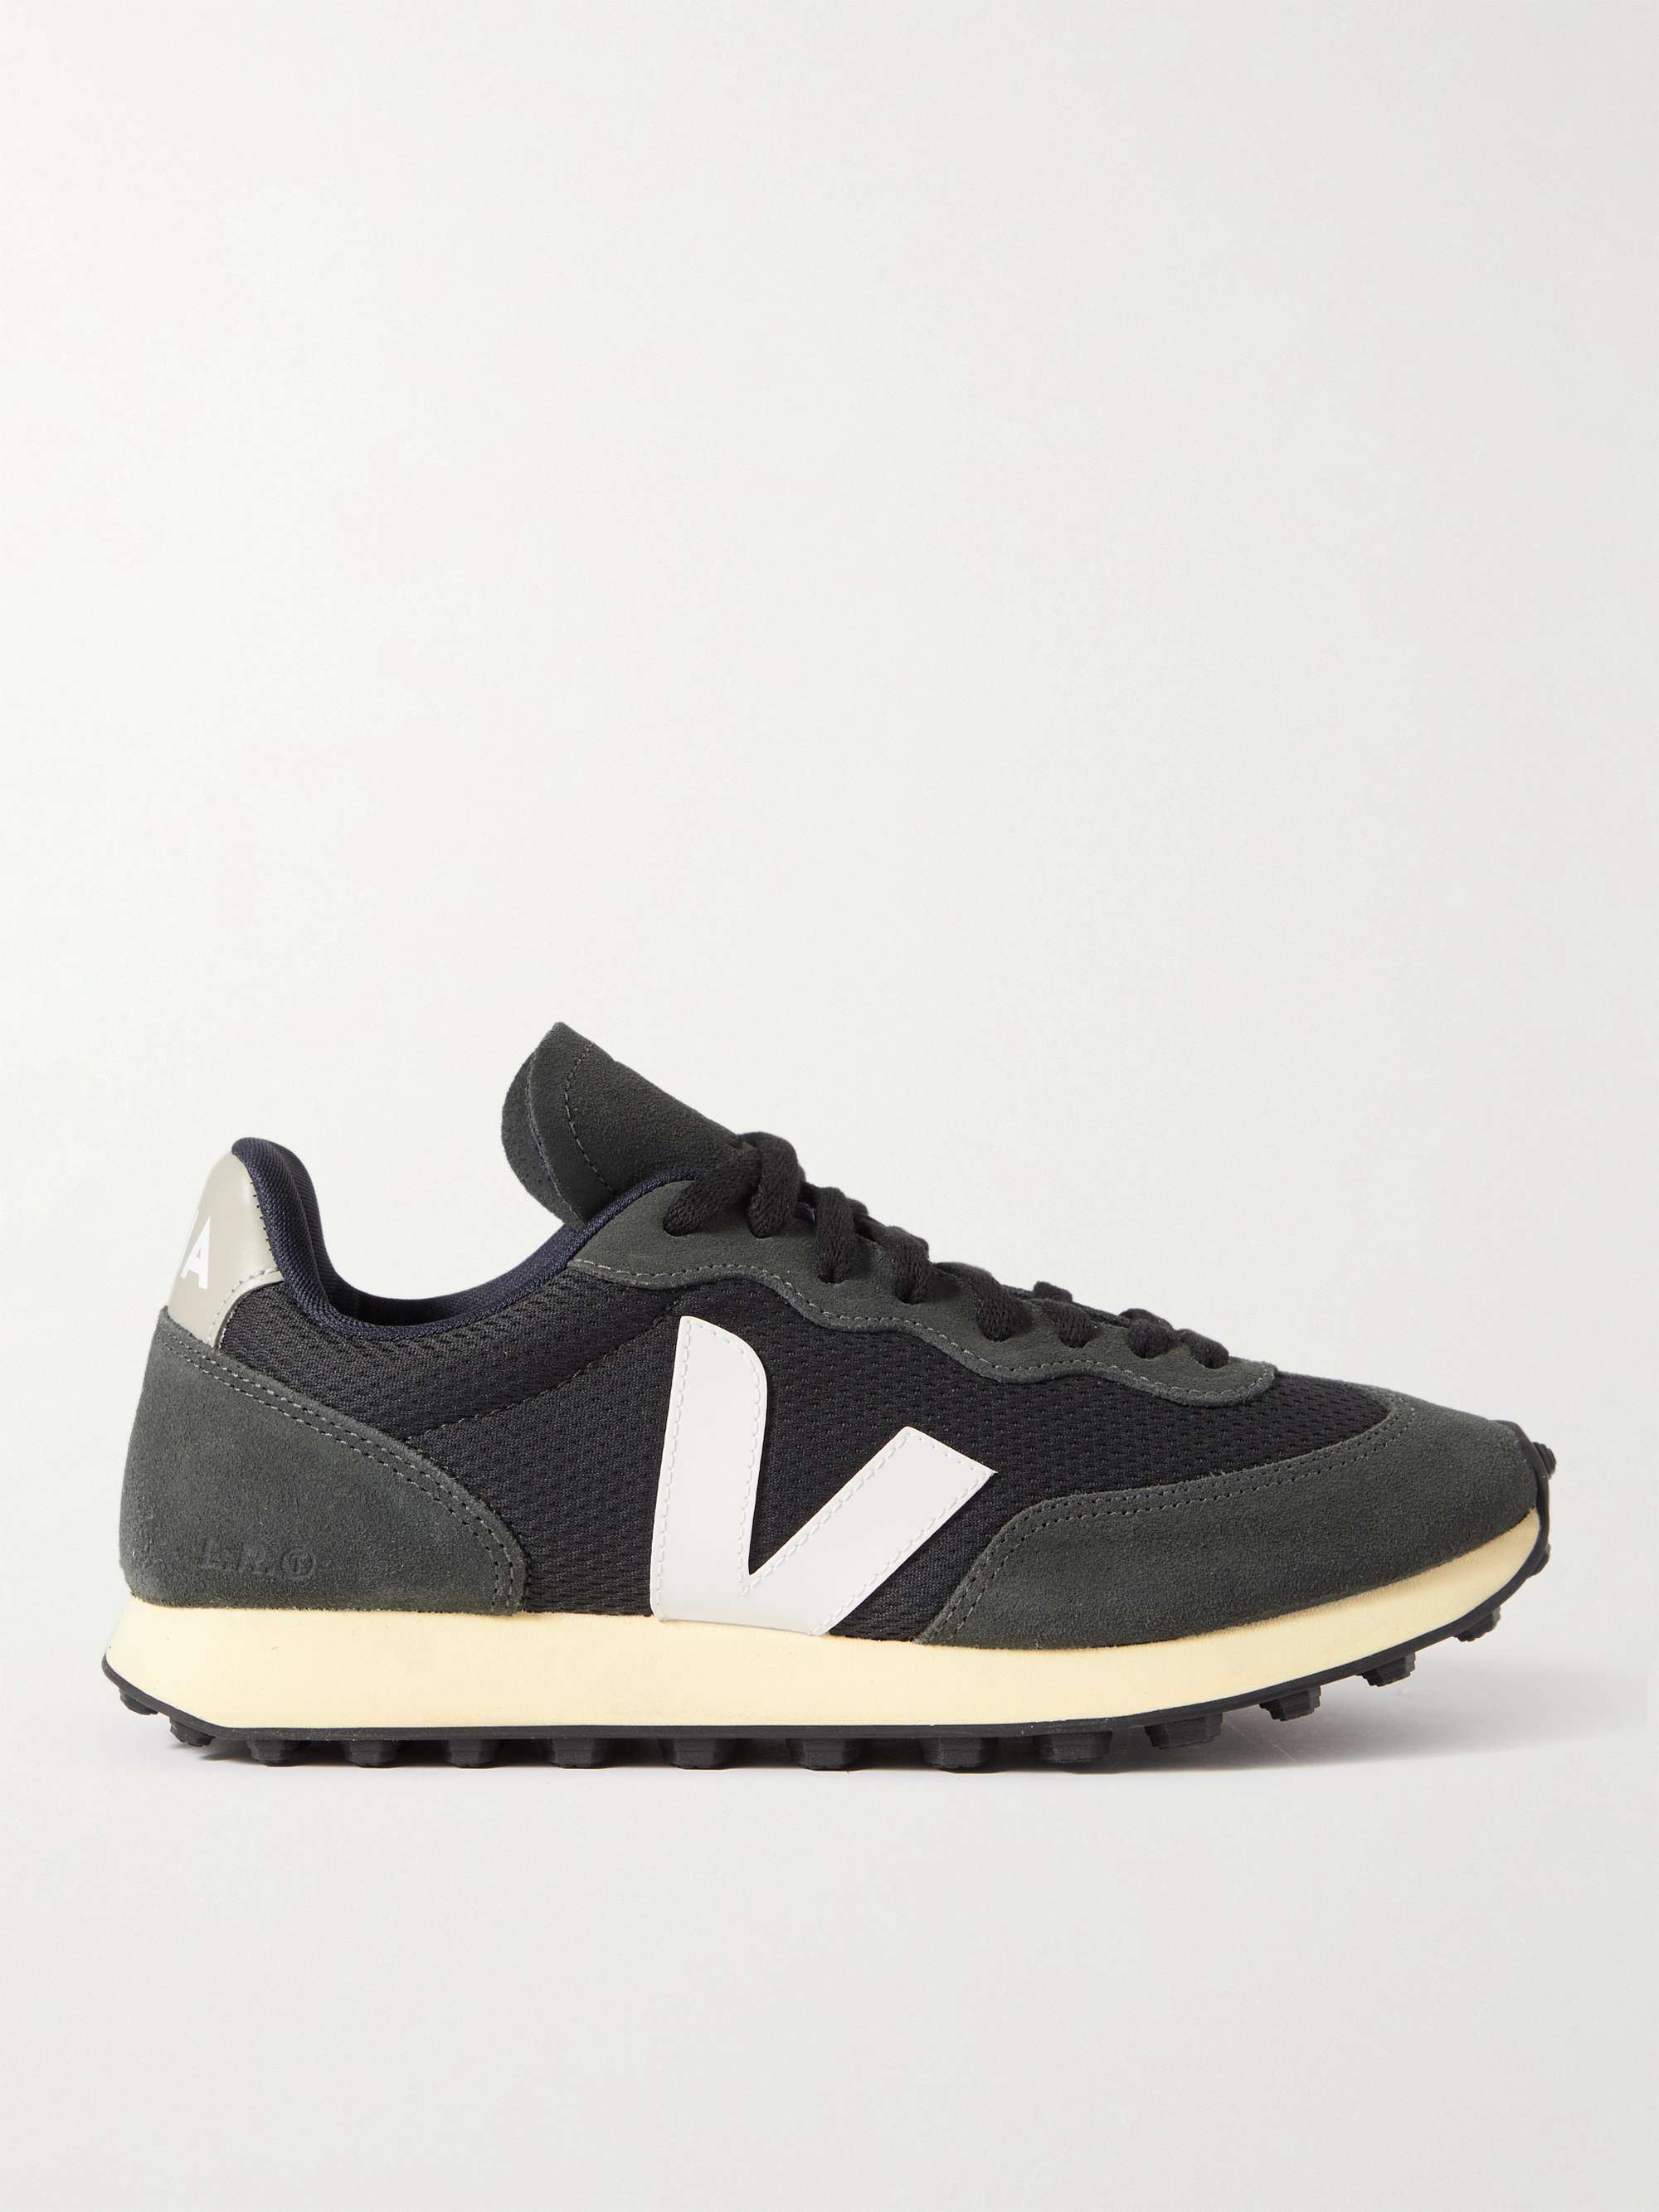 VEJA Rio Branco Leather-Trimmed Alveomesh and Suede Sneakers | MR PORTER